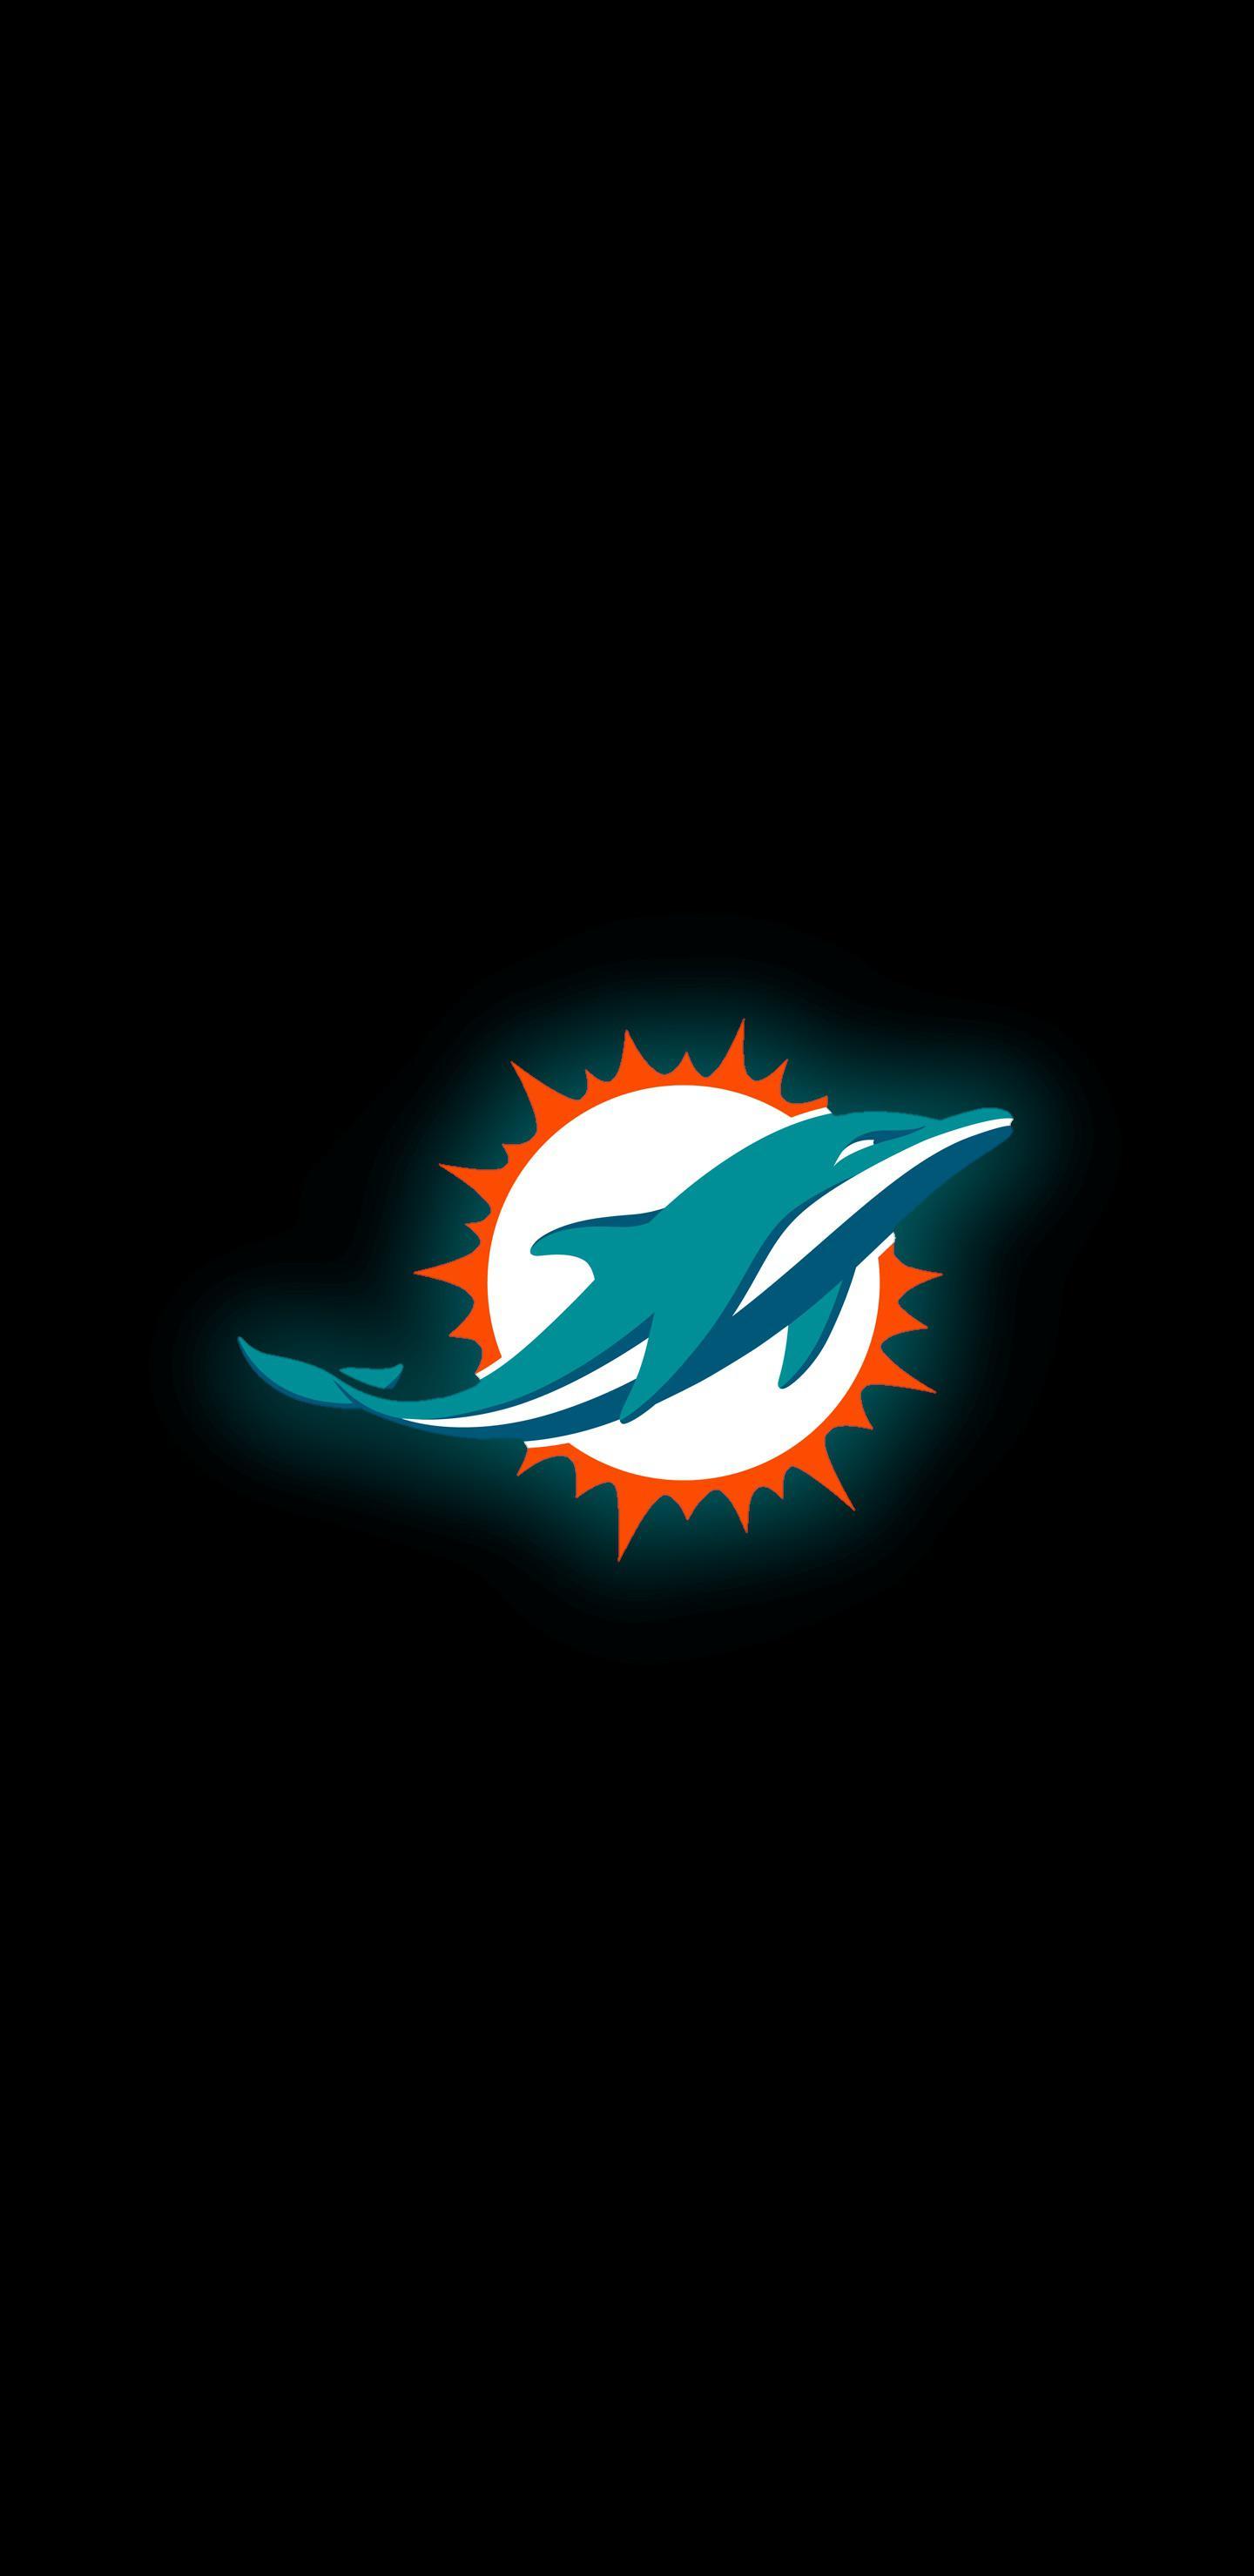 Wallpaper For Your Phone R Miamidolphins